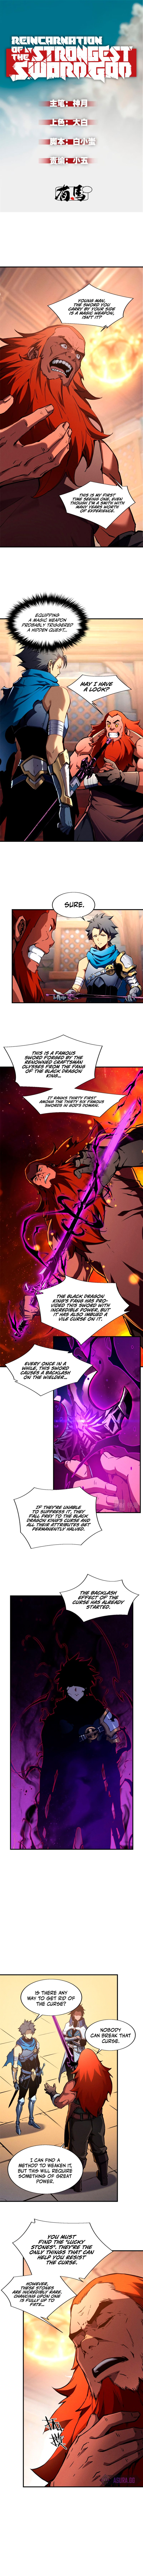 Rebirth Of The Strongest Sword God - Page 2